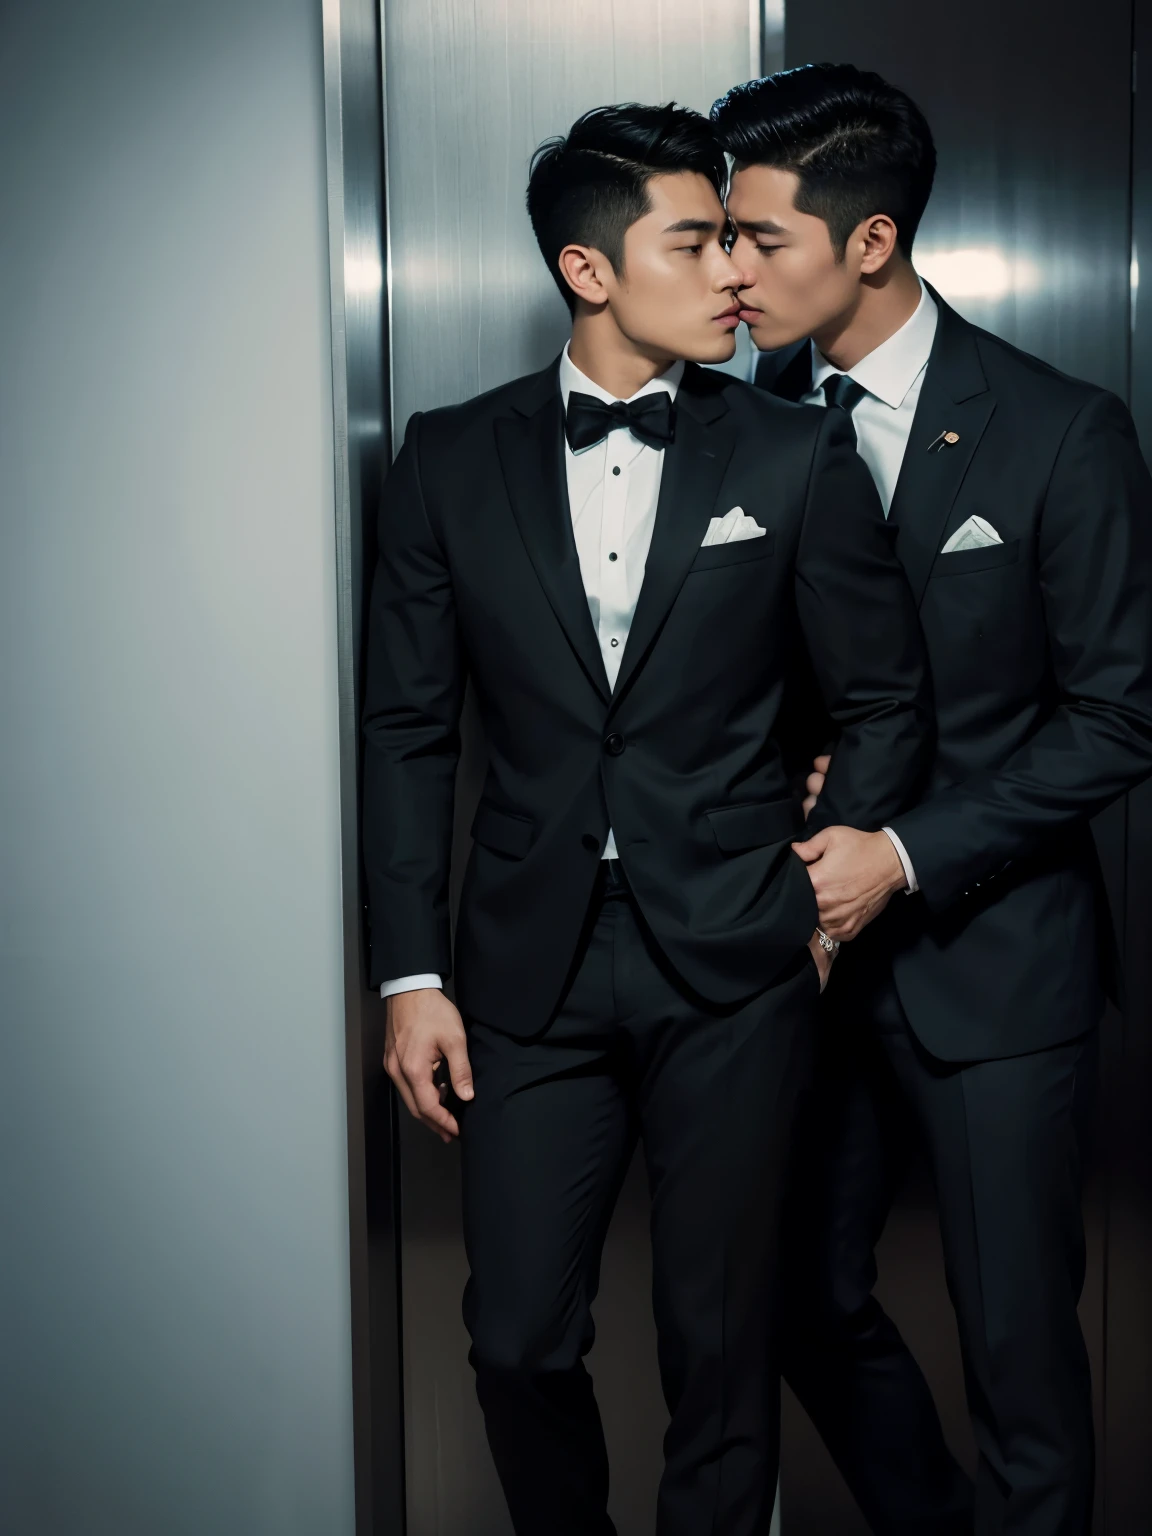 two men, two males, hyper realistic image of extremely handsome 30 year old filipino man, mature features, wearing a fancy suit, kissing a handsome 30 year old muscular filipino man wearing a fitted black suit, in an enclosed elevator, sex from behind, standing sex, perfect face, front view, full body, fill frame, zoomed out, highly detailed, intricate details, sharp focus